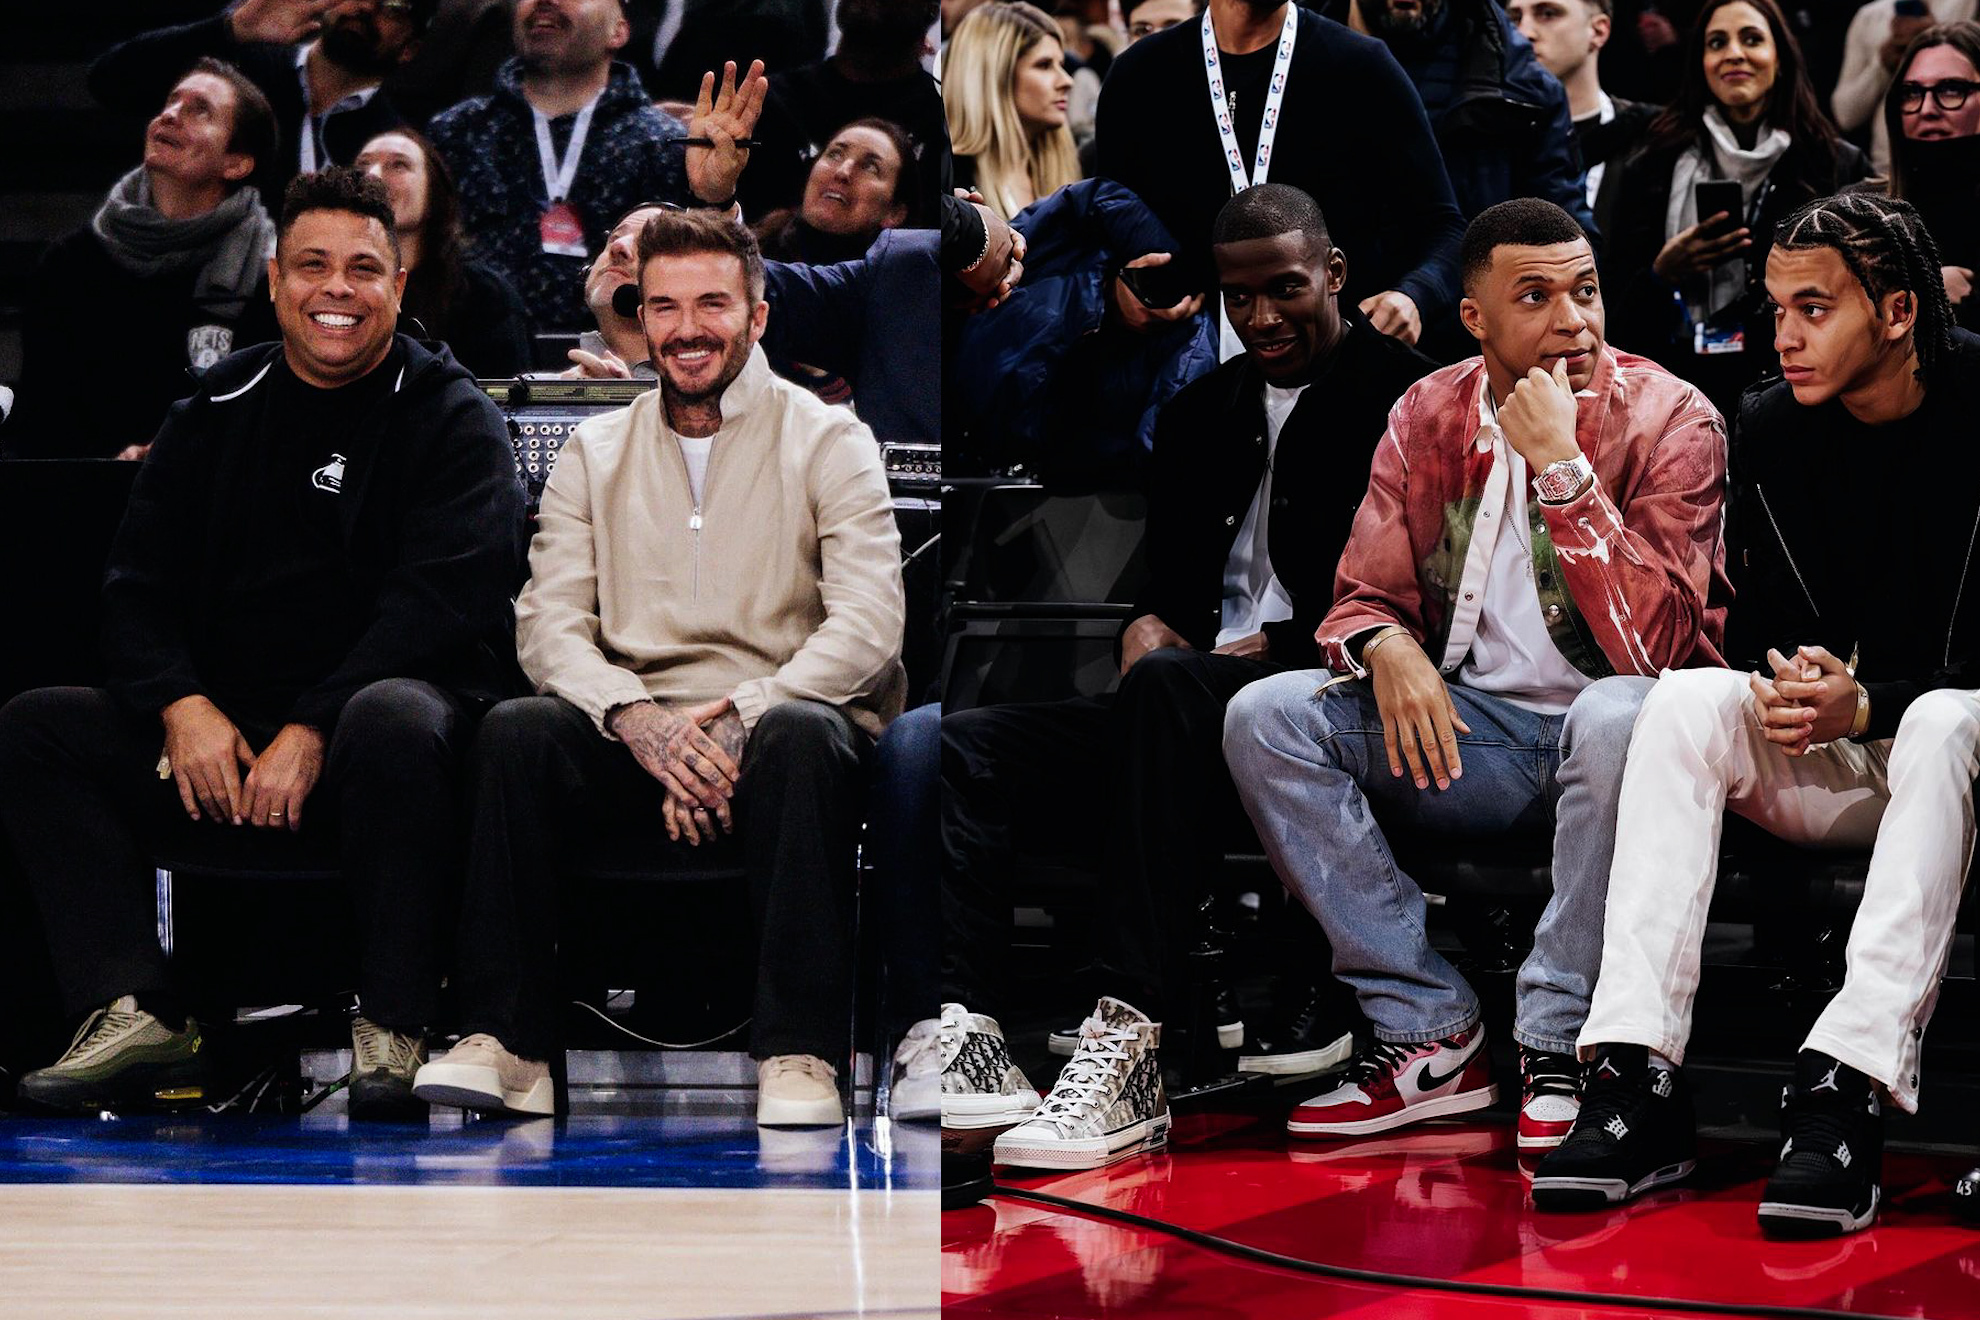 Ronaldo, Beckham and Mbappé steal the spotlight at an NBA game in Paris